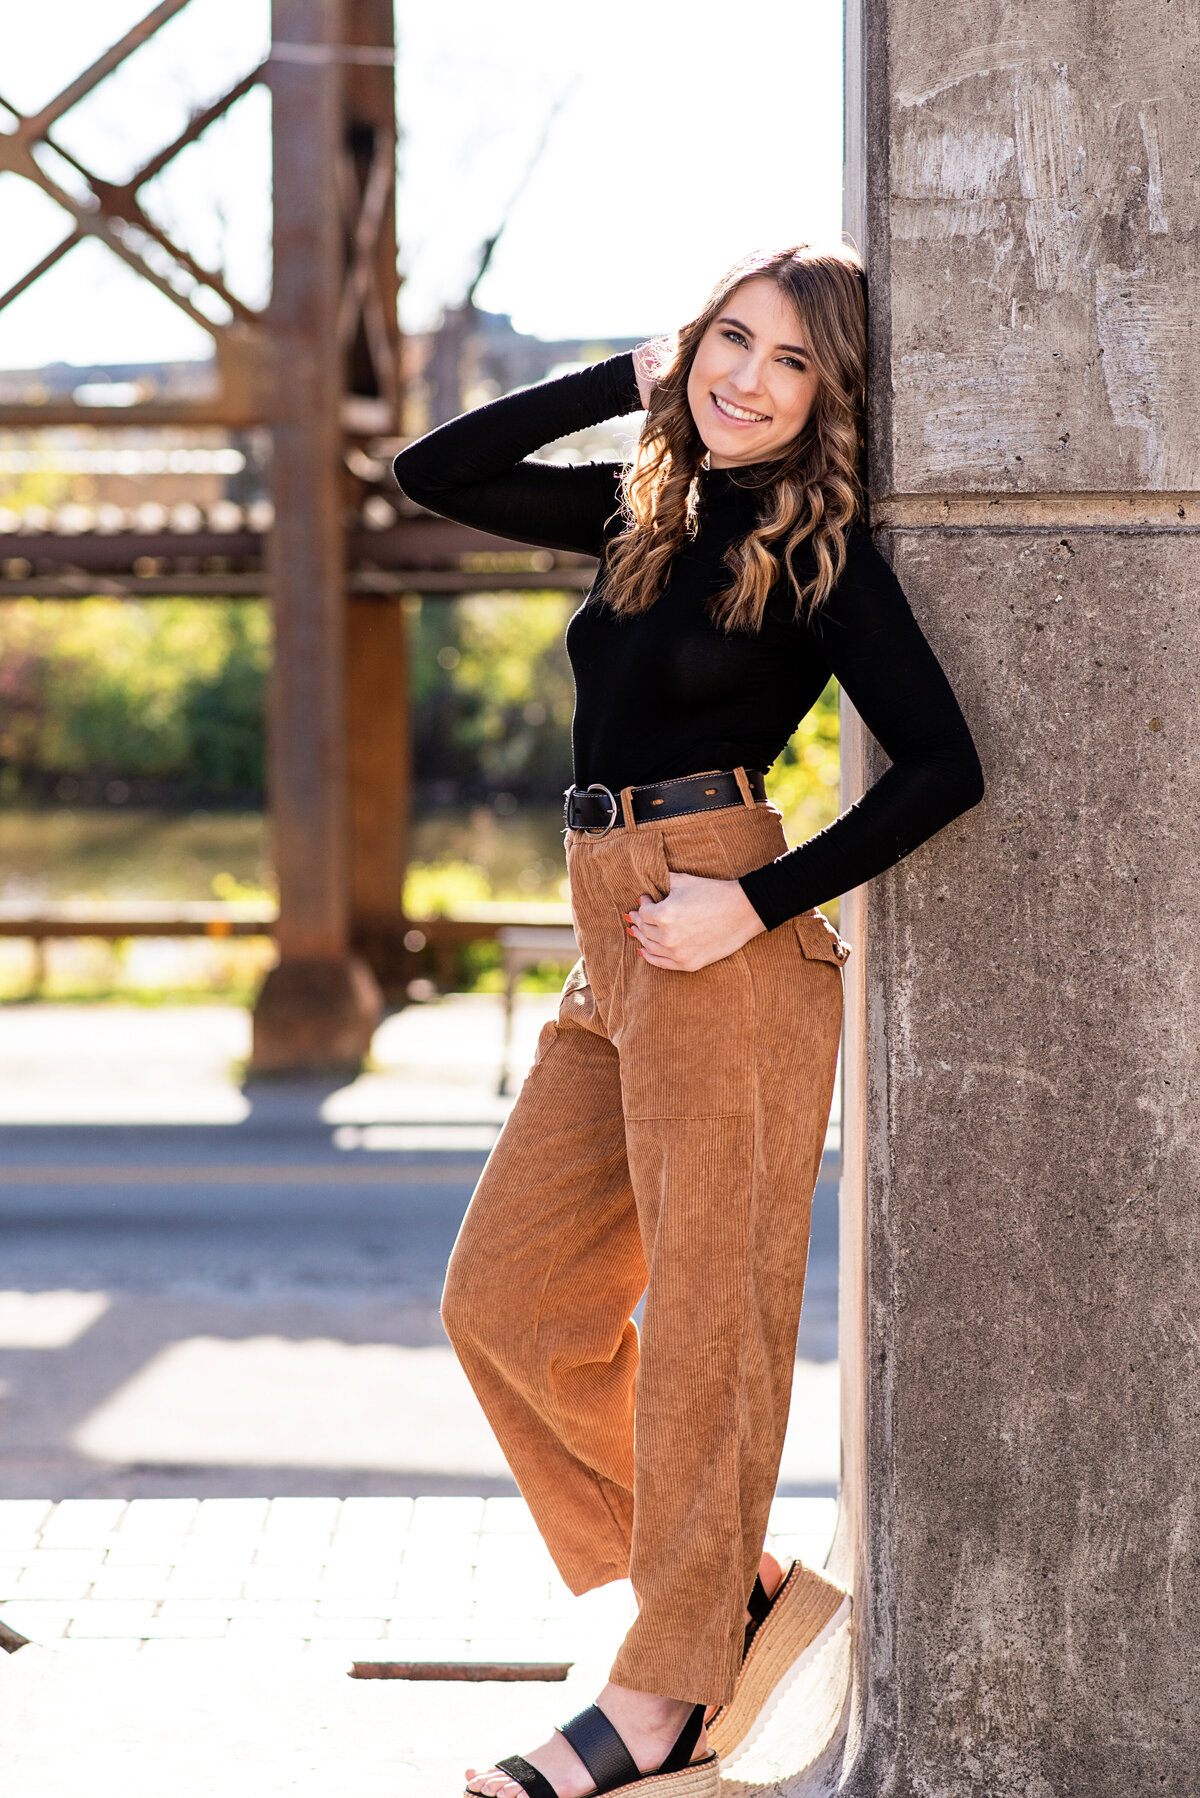 Fall senior portrait session for Richmond high school senior girl in downtown Richmond, VA. Bella is wearing brown pants and a black turtleneck and posing at the flood wall.